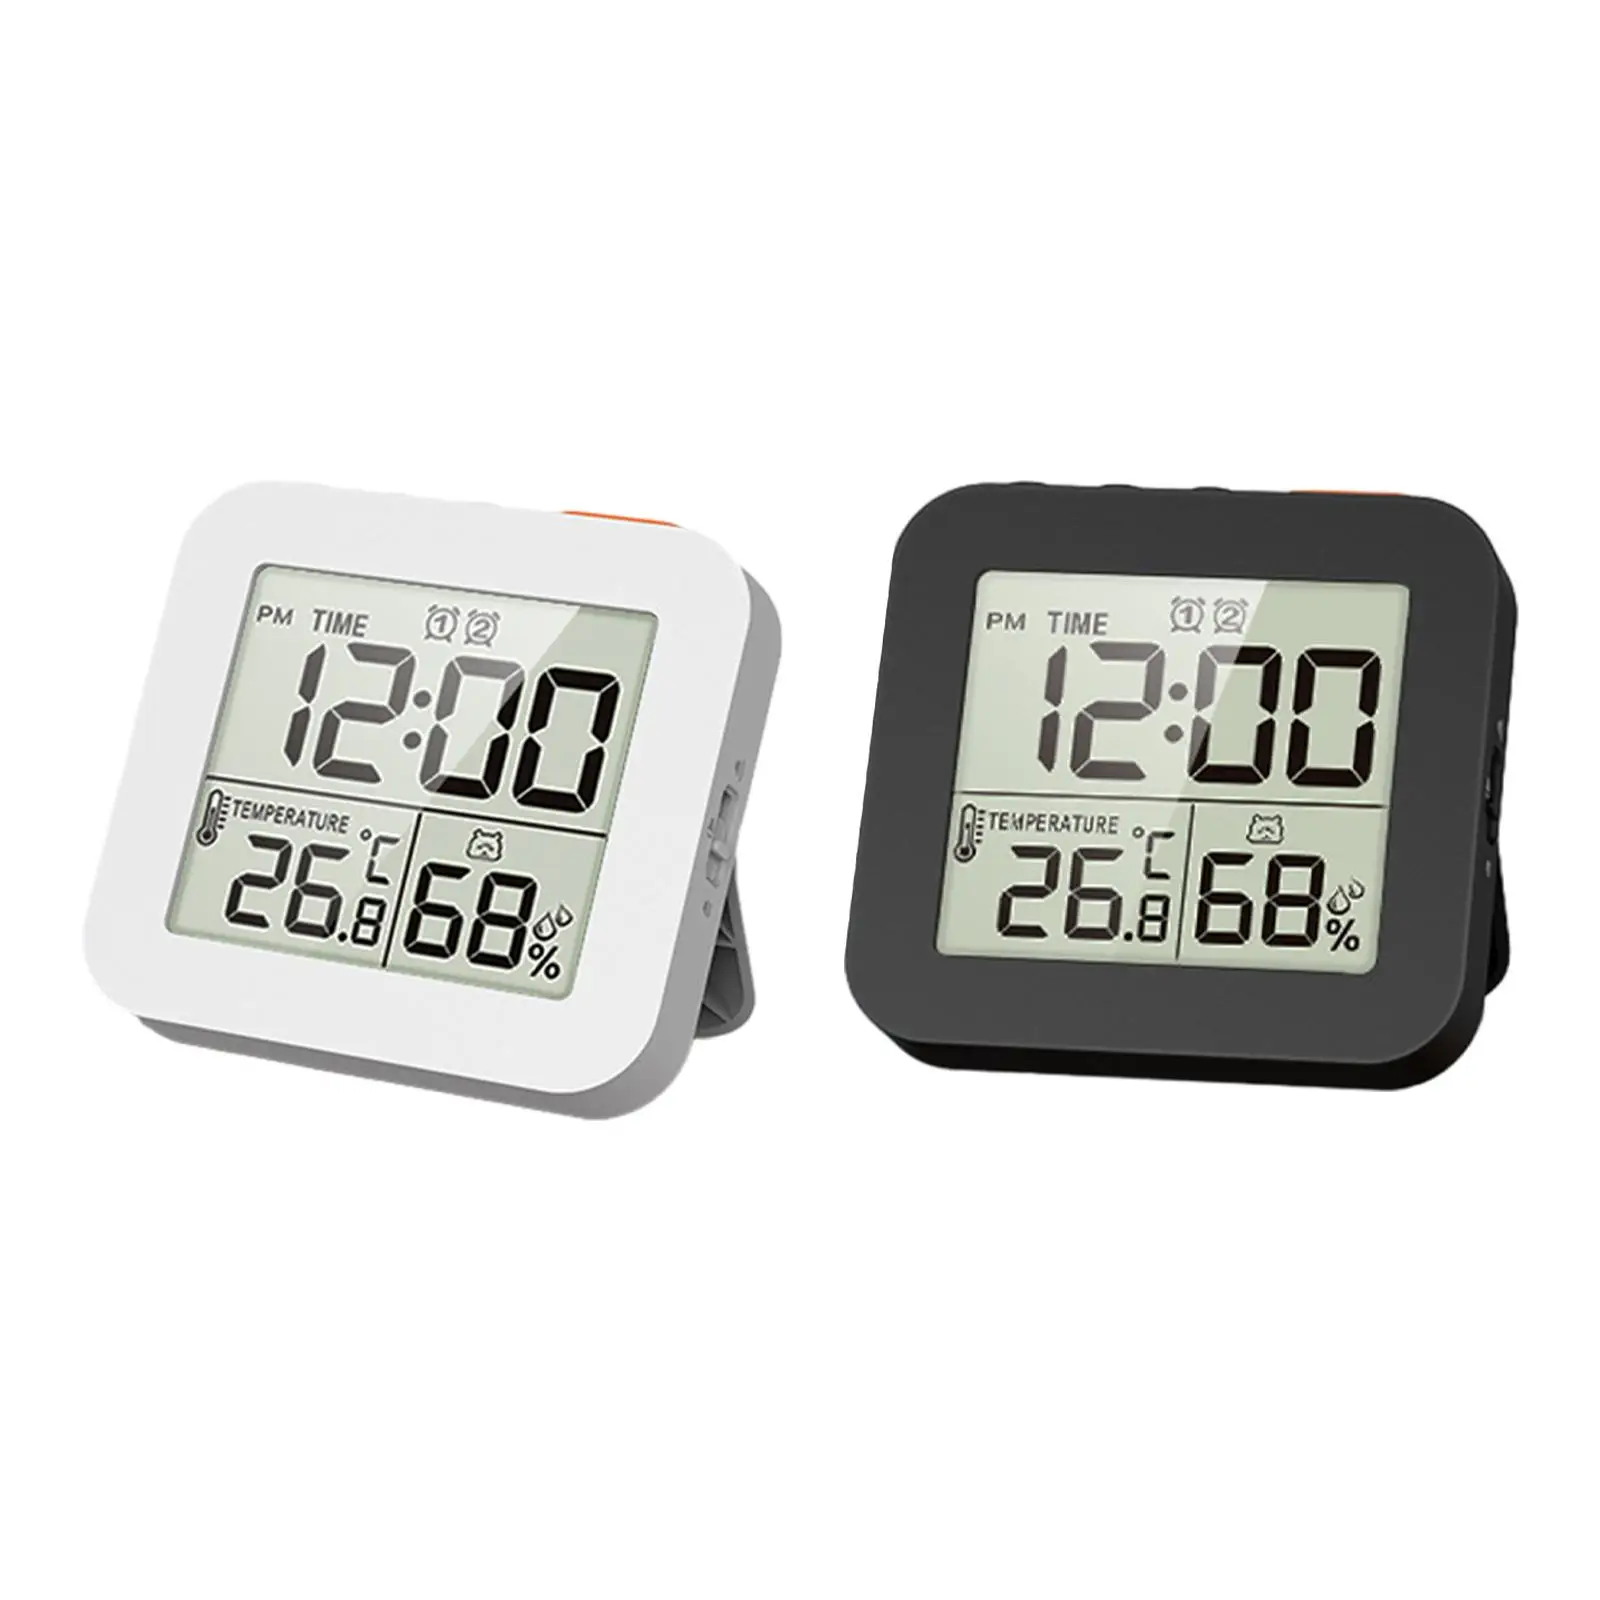  Clocks Large LCD Display for Business Professional Makeup Teacher